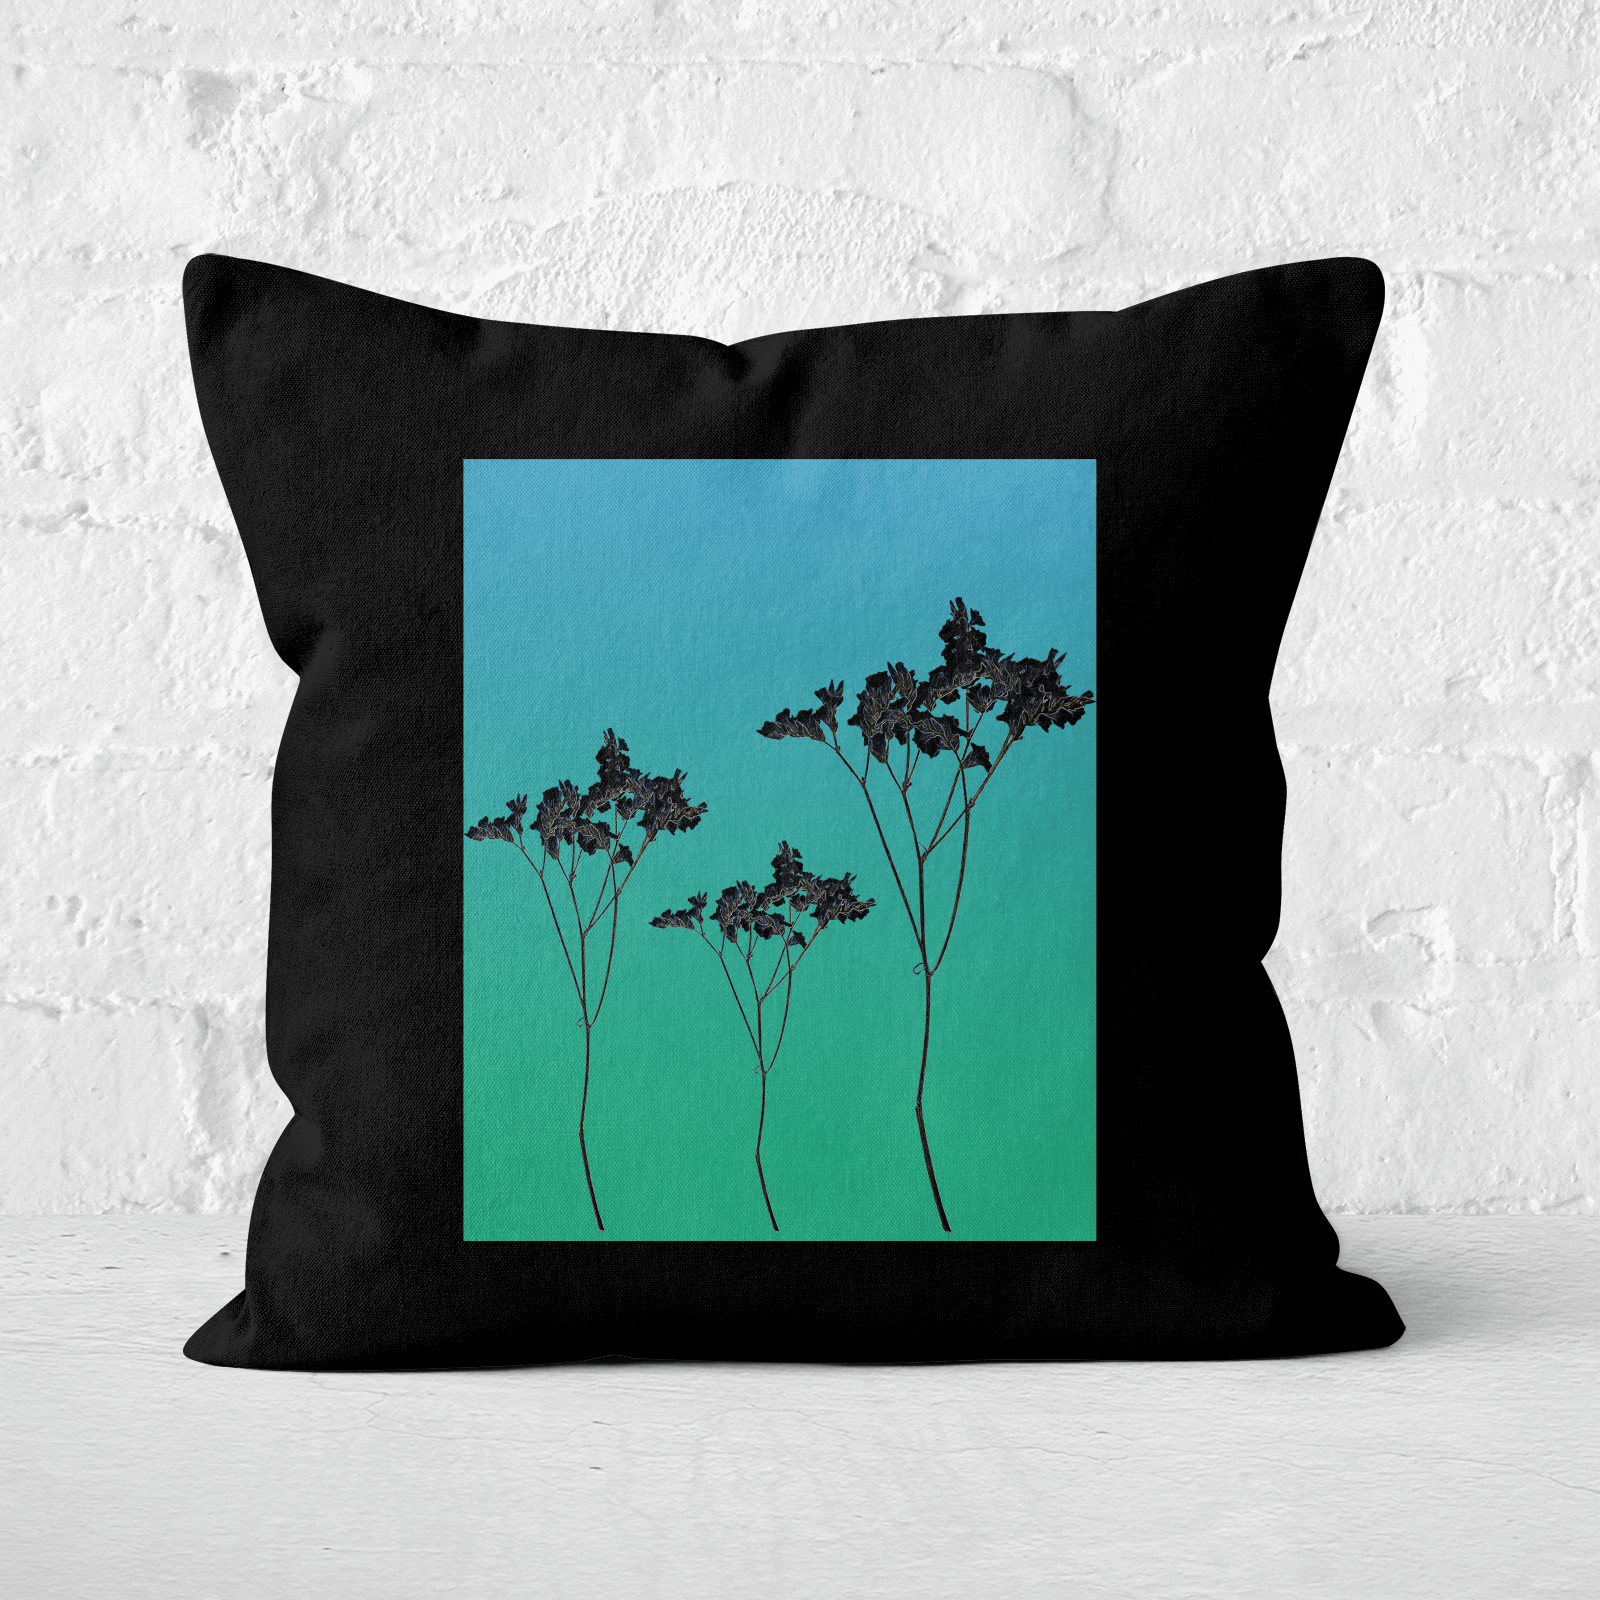 Pressed Flowers Ombre Sunrise Flowers Square Cushion - 60x60cm - Soft Touch